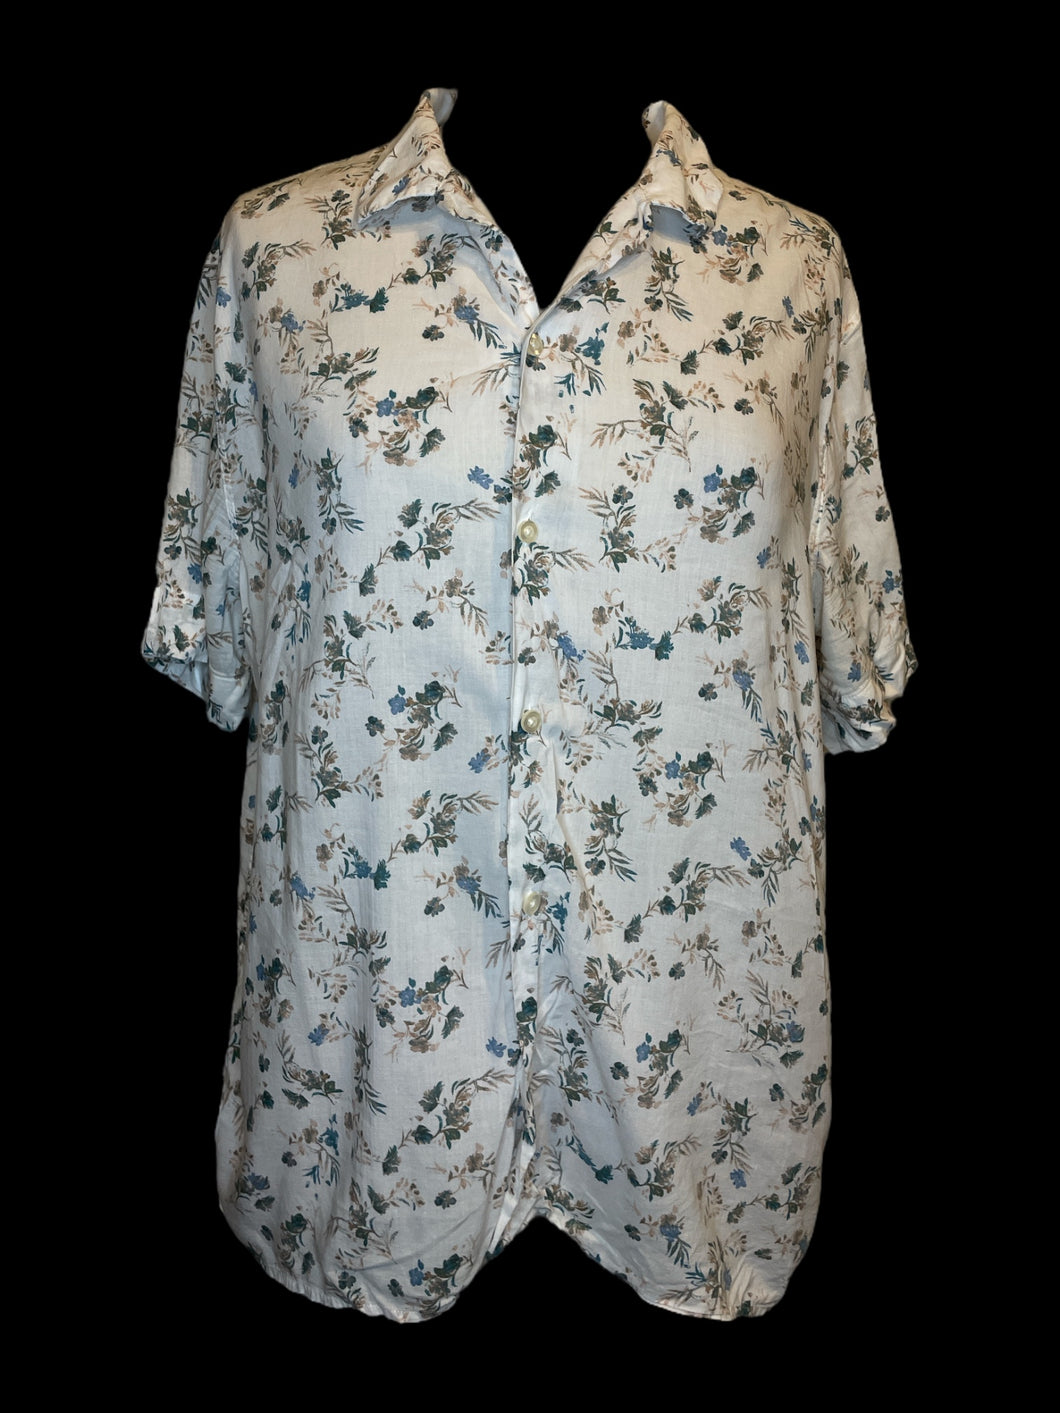 1X White, green, blue, & beige floral pattern short sleeve button down top w/ folded collar